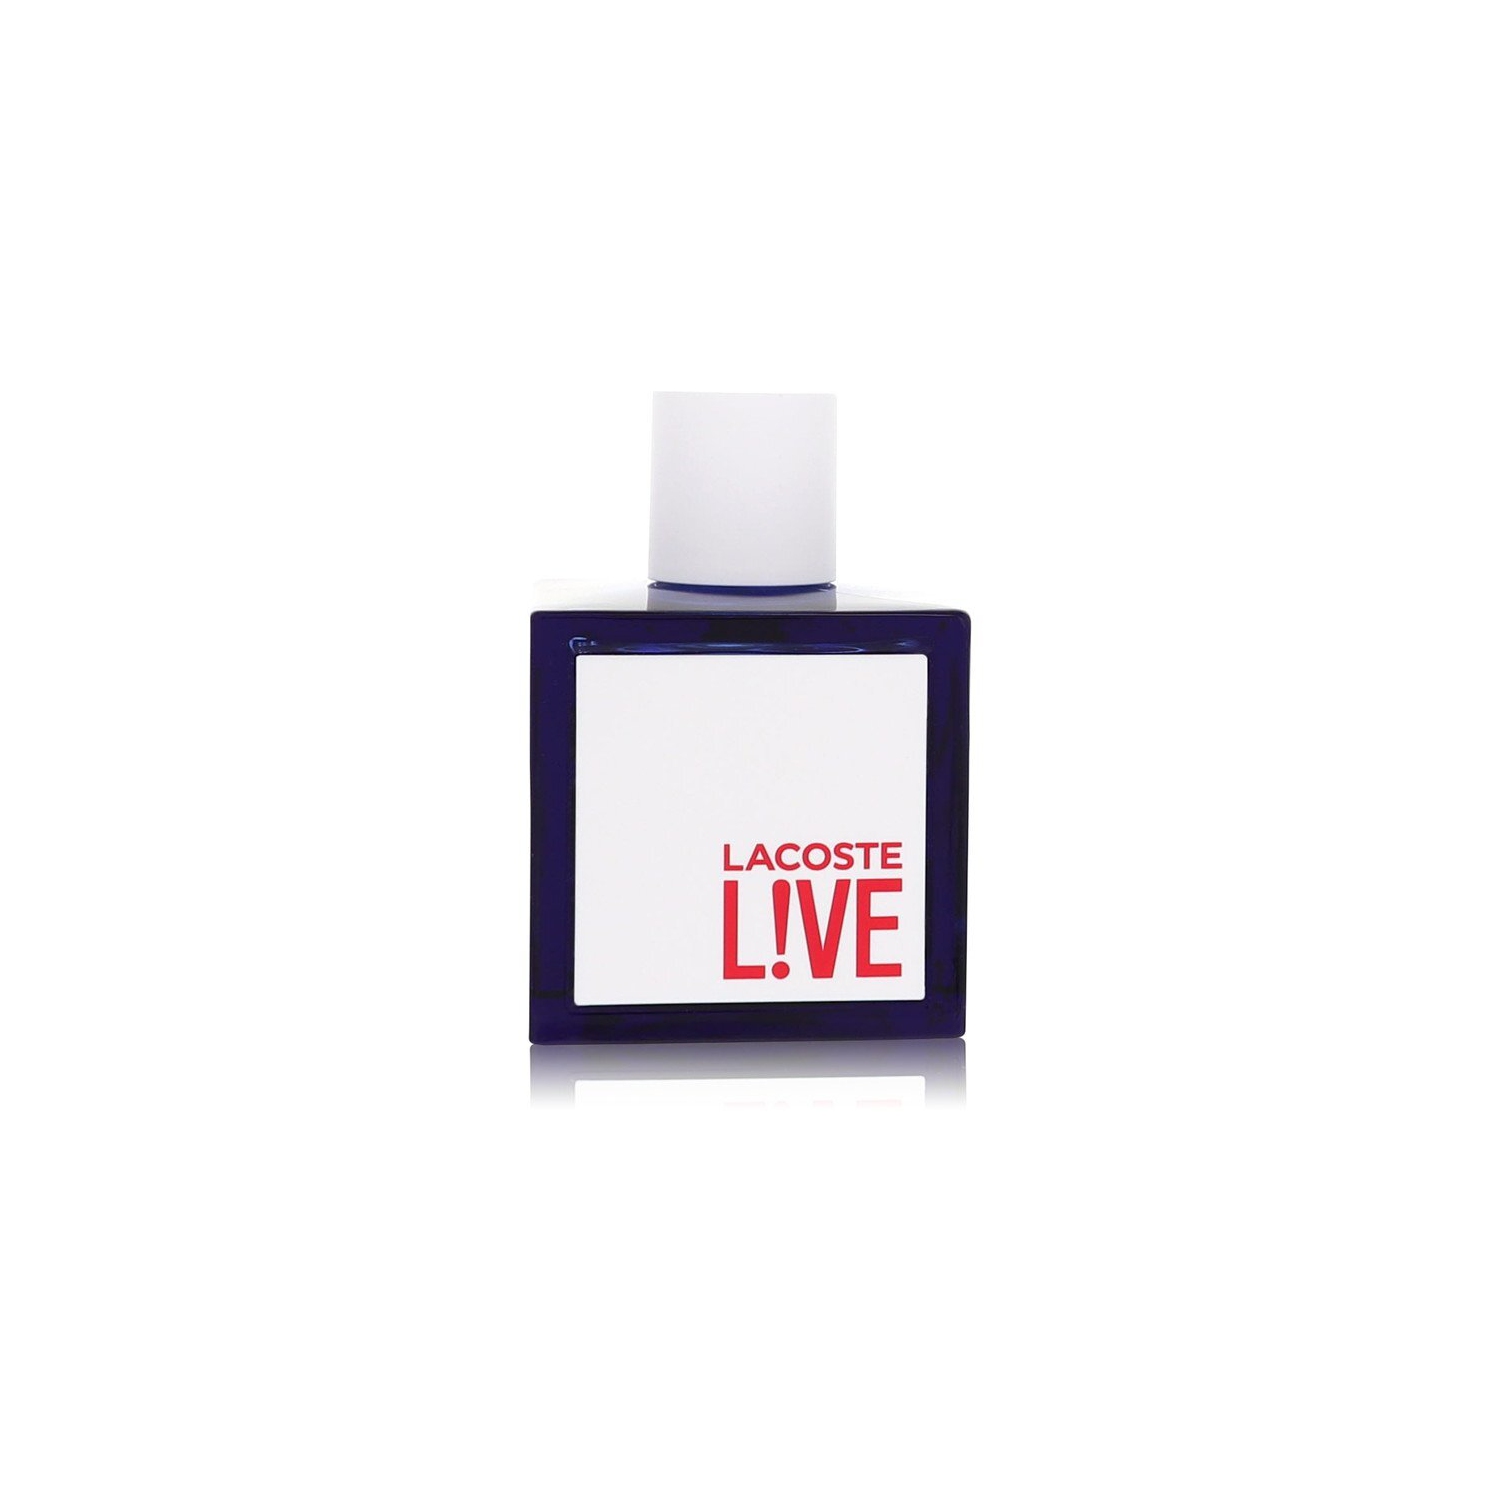 Lacoste Live By Lacoste Edt Spray 3.4 Oz *tester